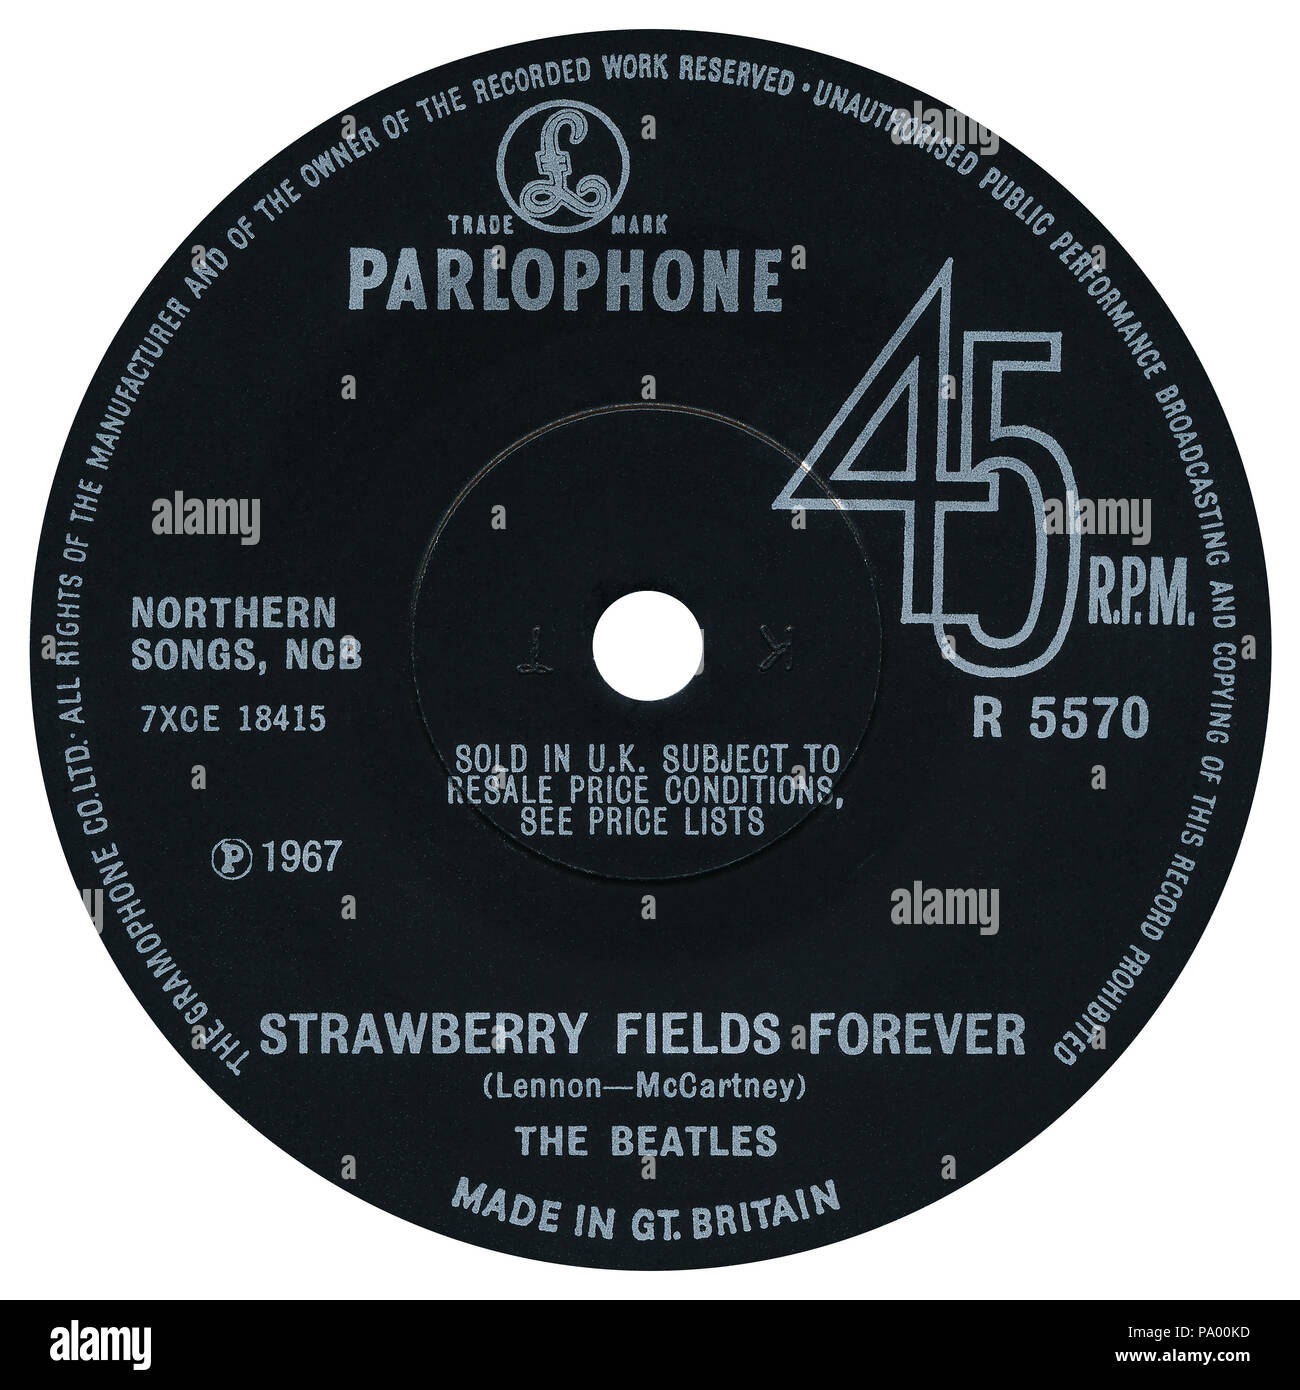 UK 45 rpm 7' single of Strawberry Fields Forever by The Beatles on the Parlophone label from 1967. Composed by John Lennon and Paul McCartney and produced by George Martin. Stock Photo